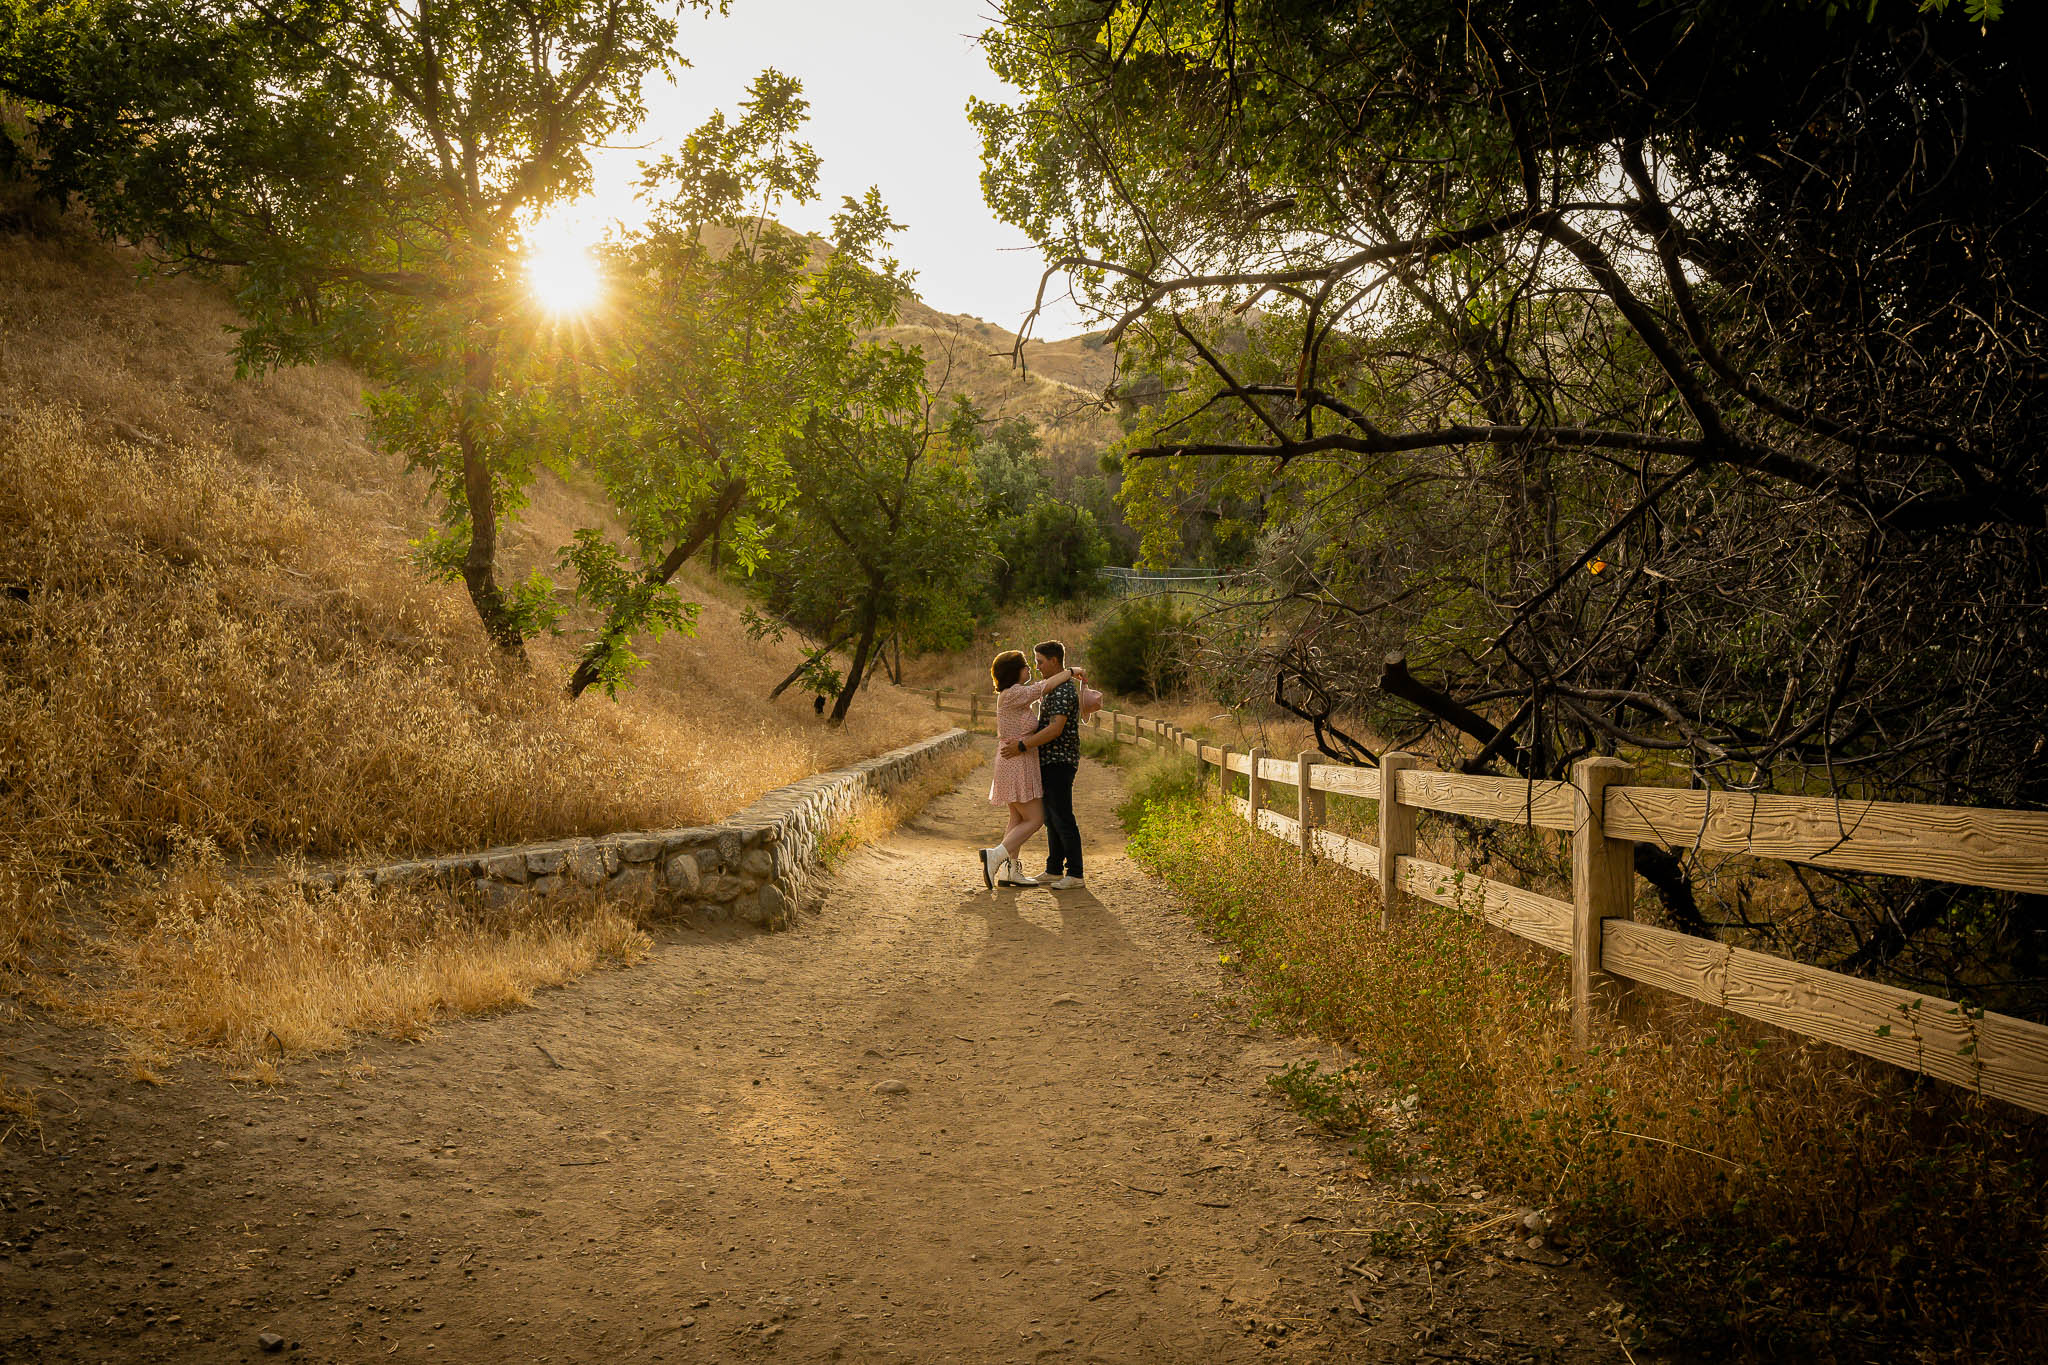 Thomas Kim, a wedding photographer, captures a couple walking down a path in a wooded area.